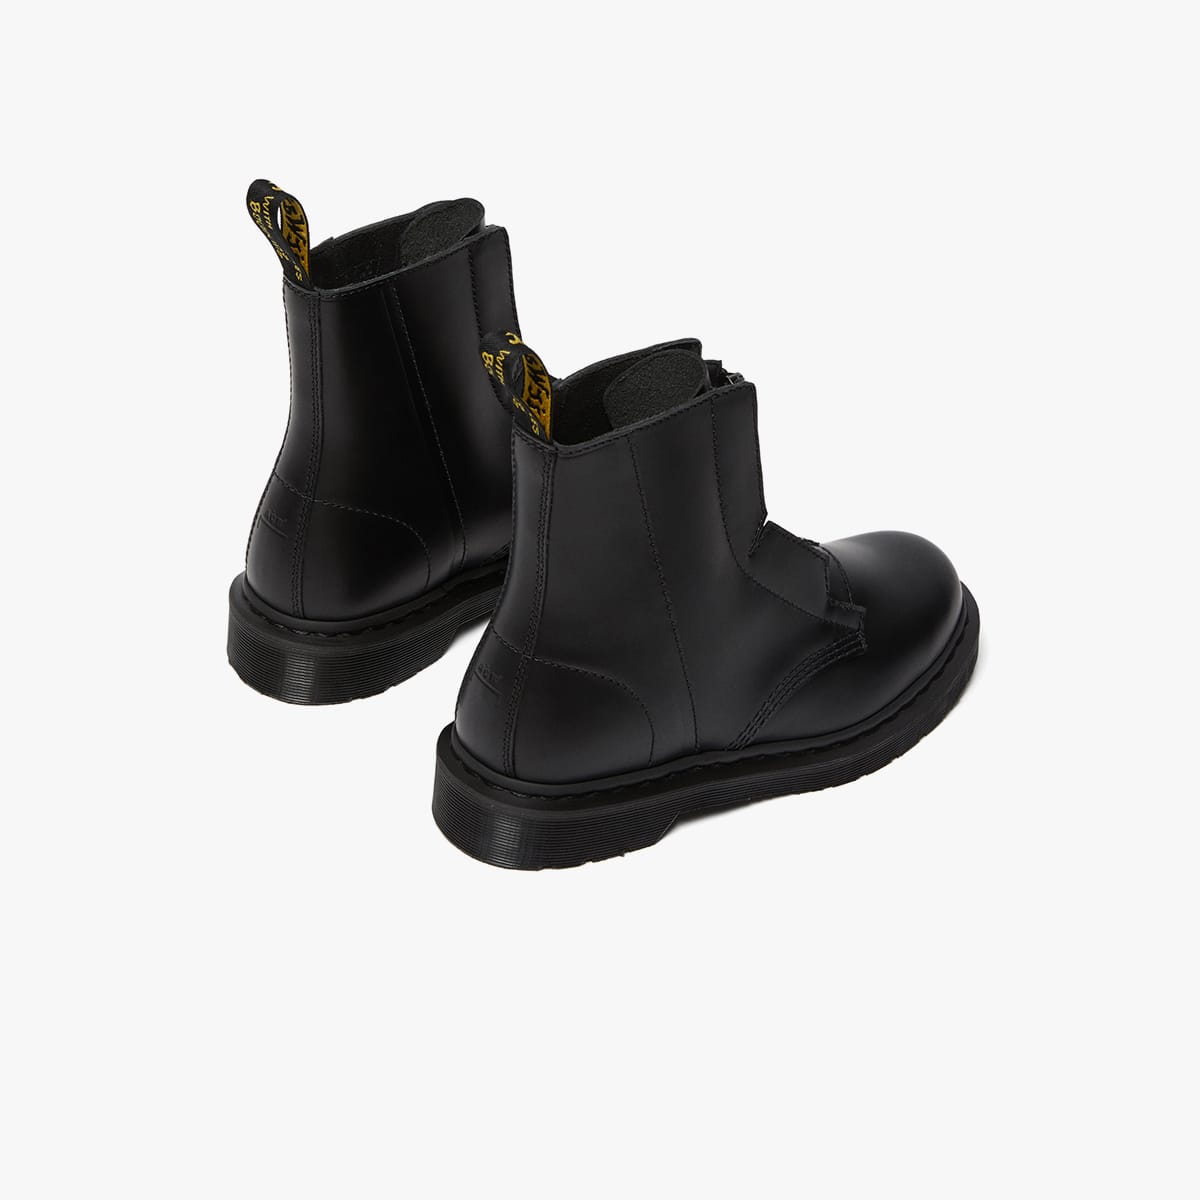 A-COLD-WALL* x Dr Martens Zip-Up Leather Boot (Black) | END. Launches